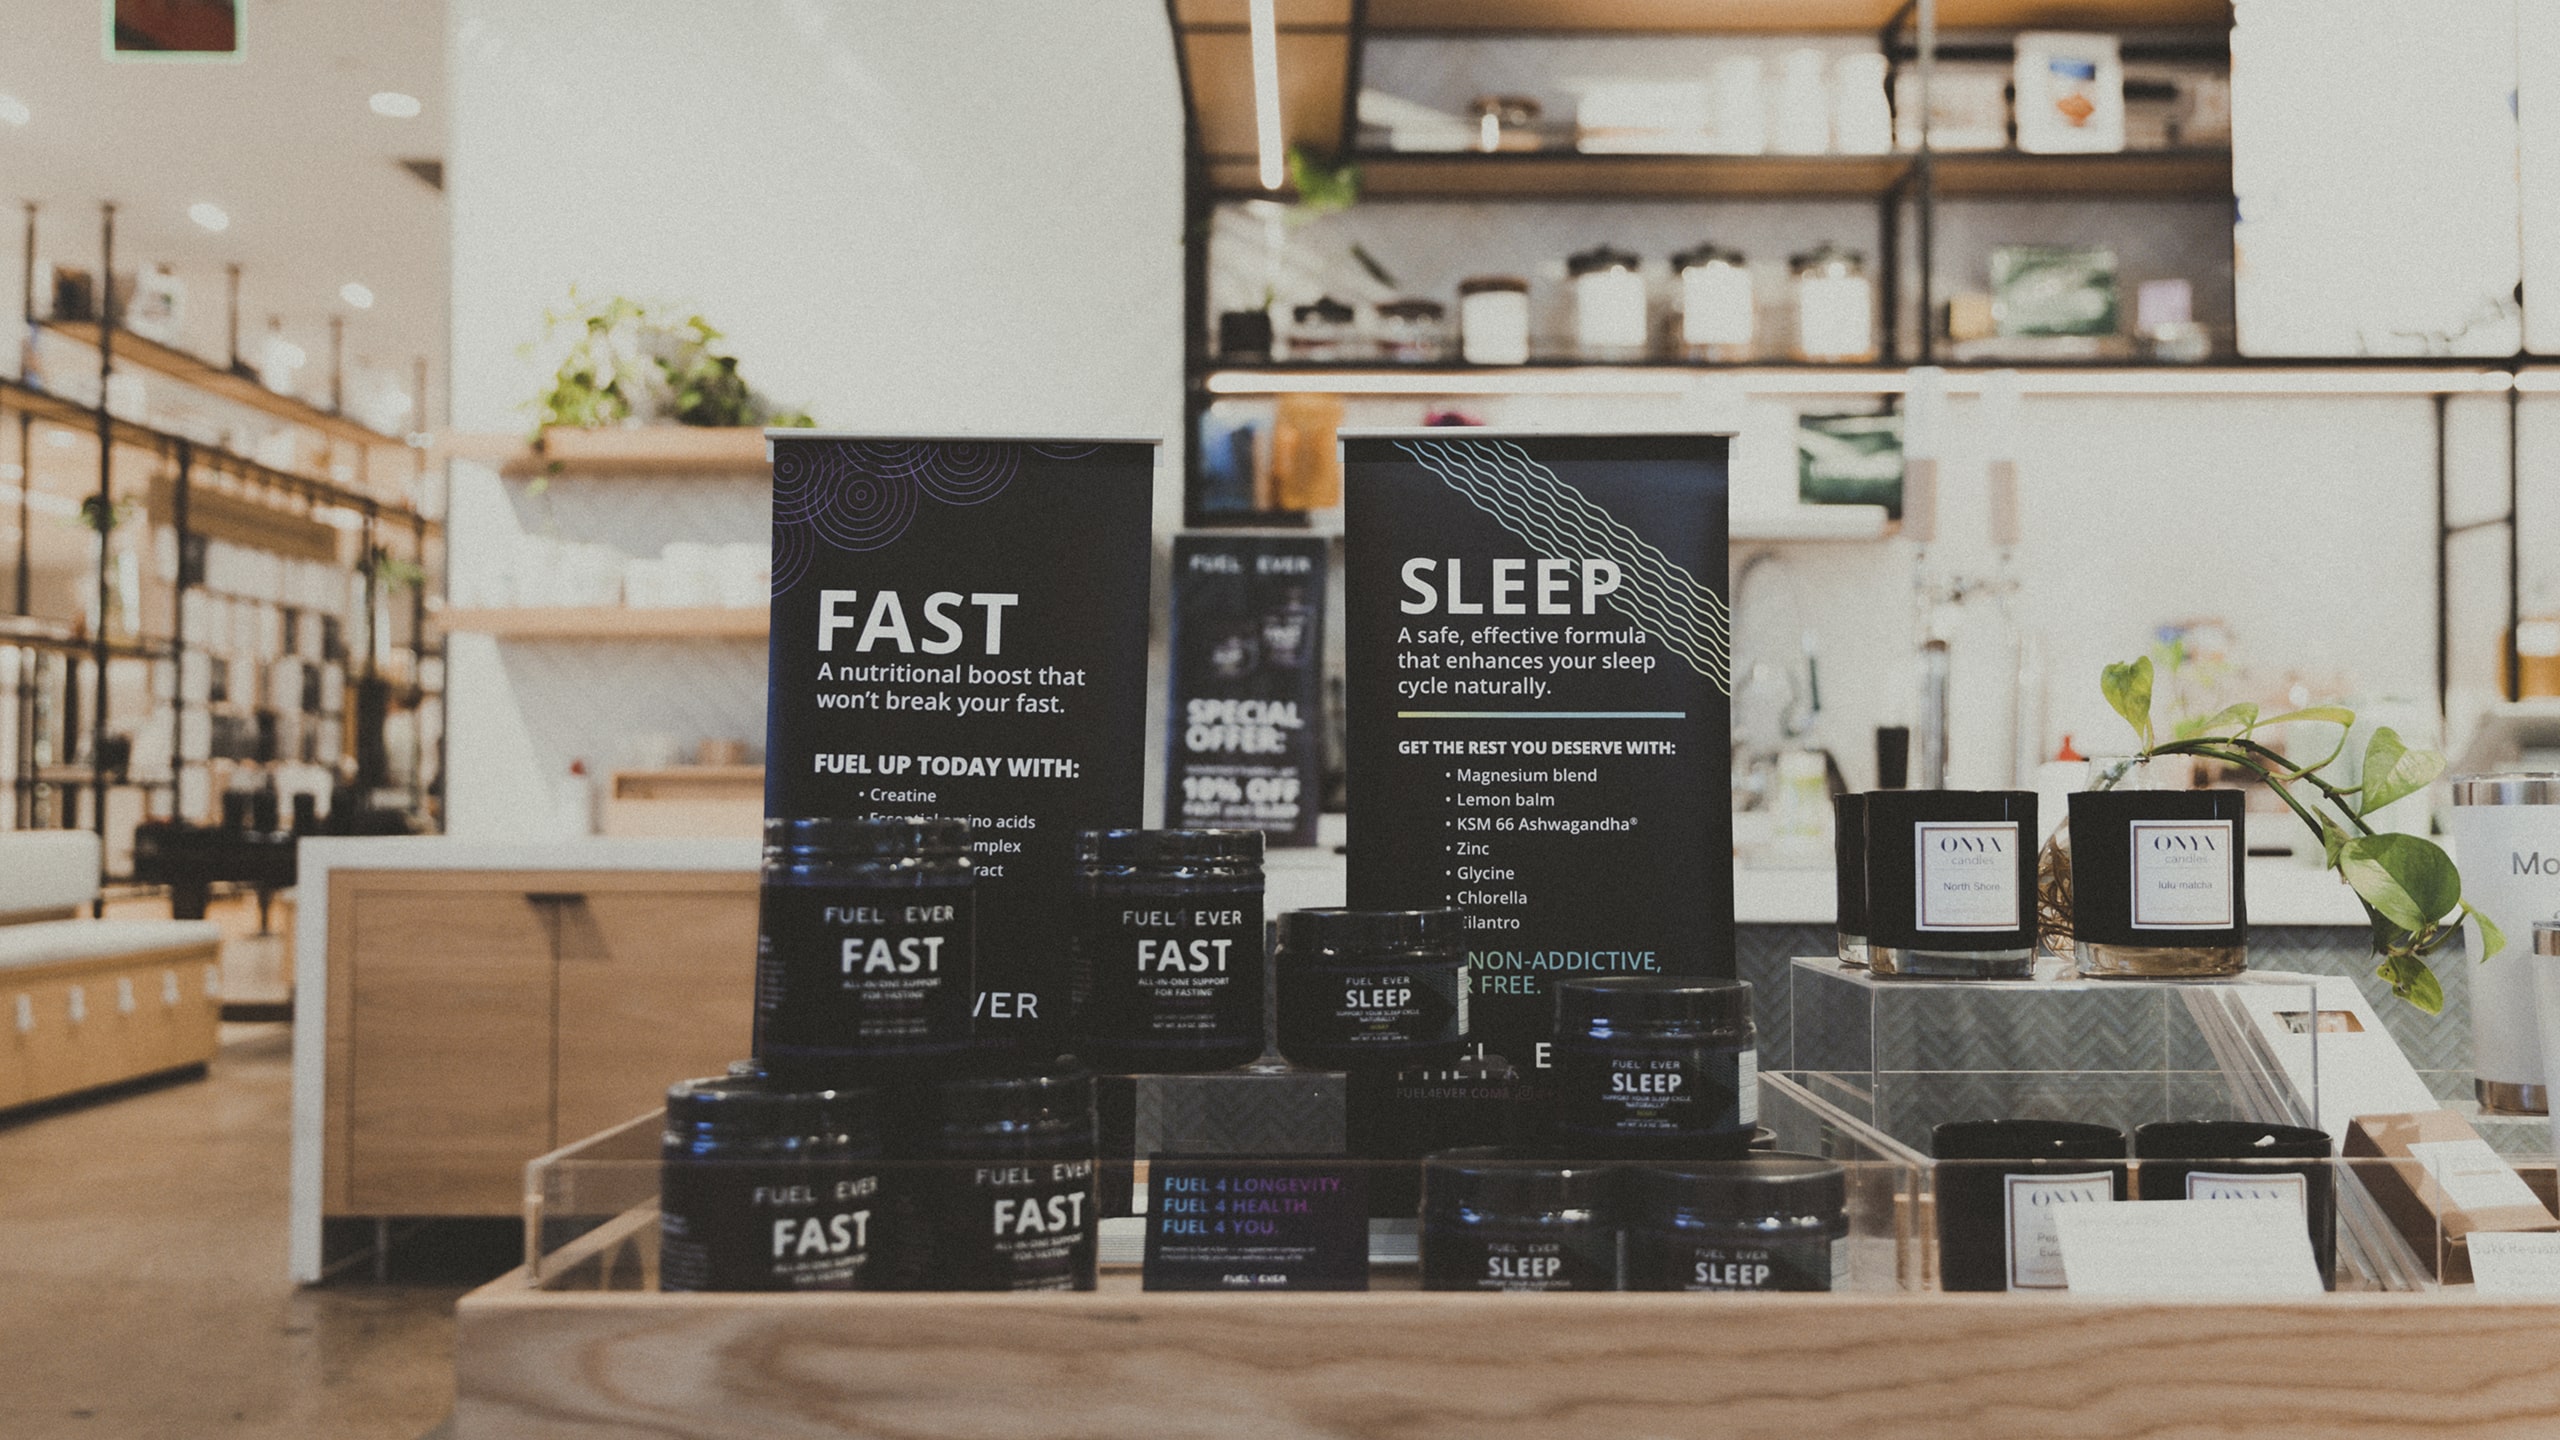 Fuel 4 Ever’s FAST & SLEEP Supplements For Sale at lululemon MOA